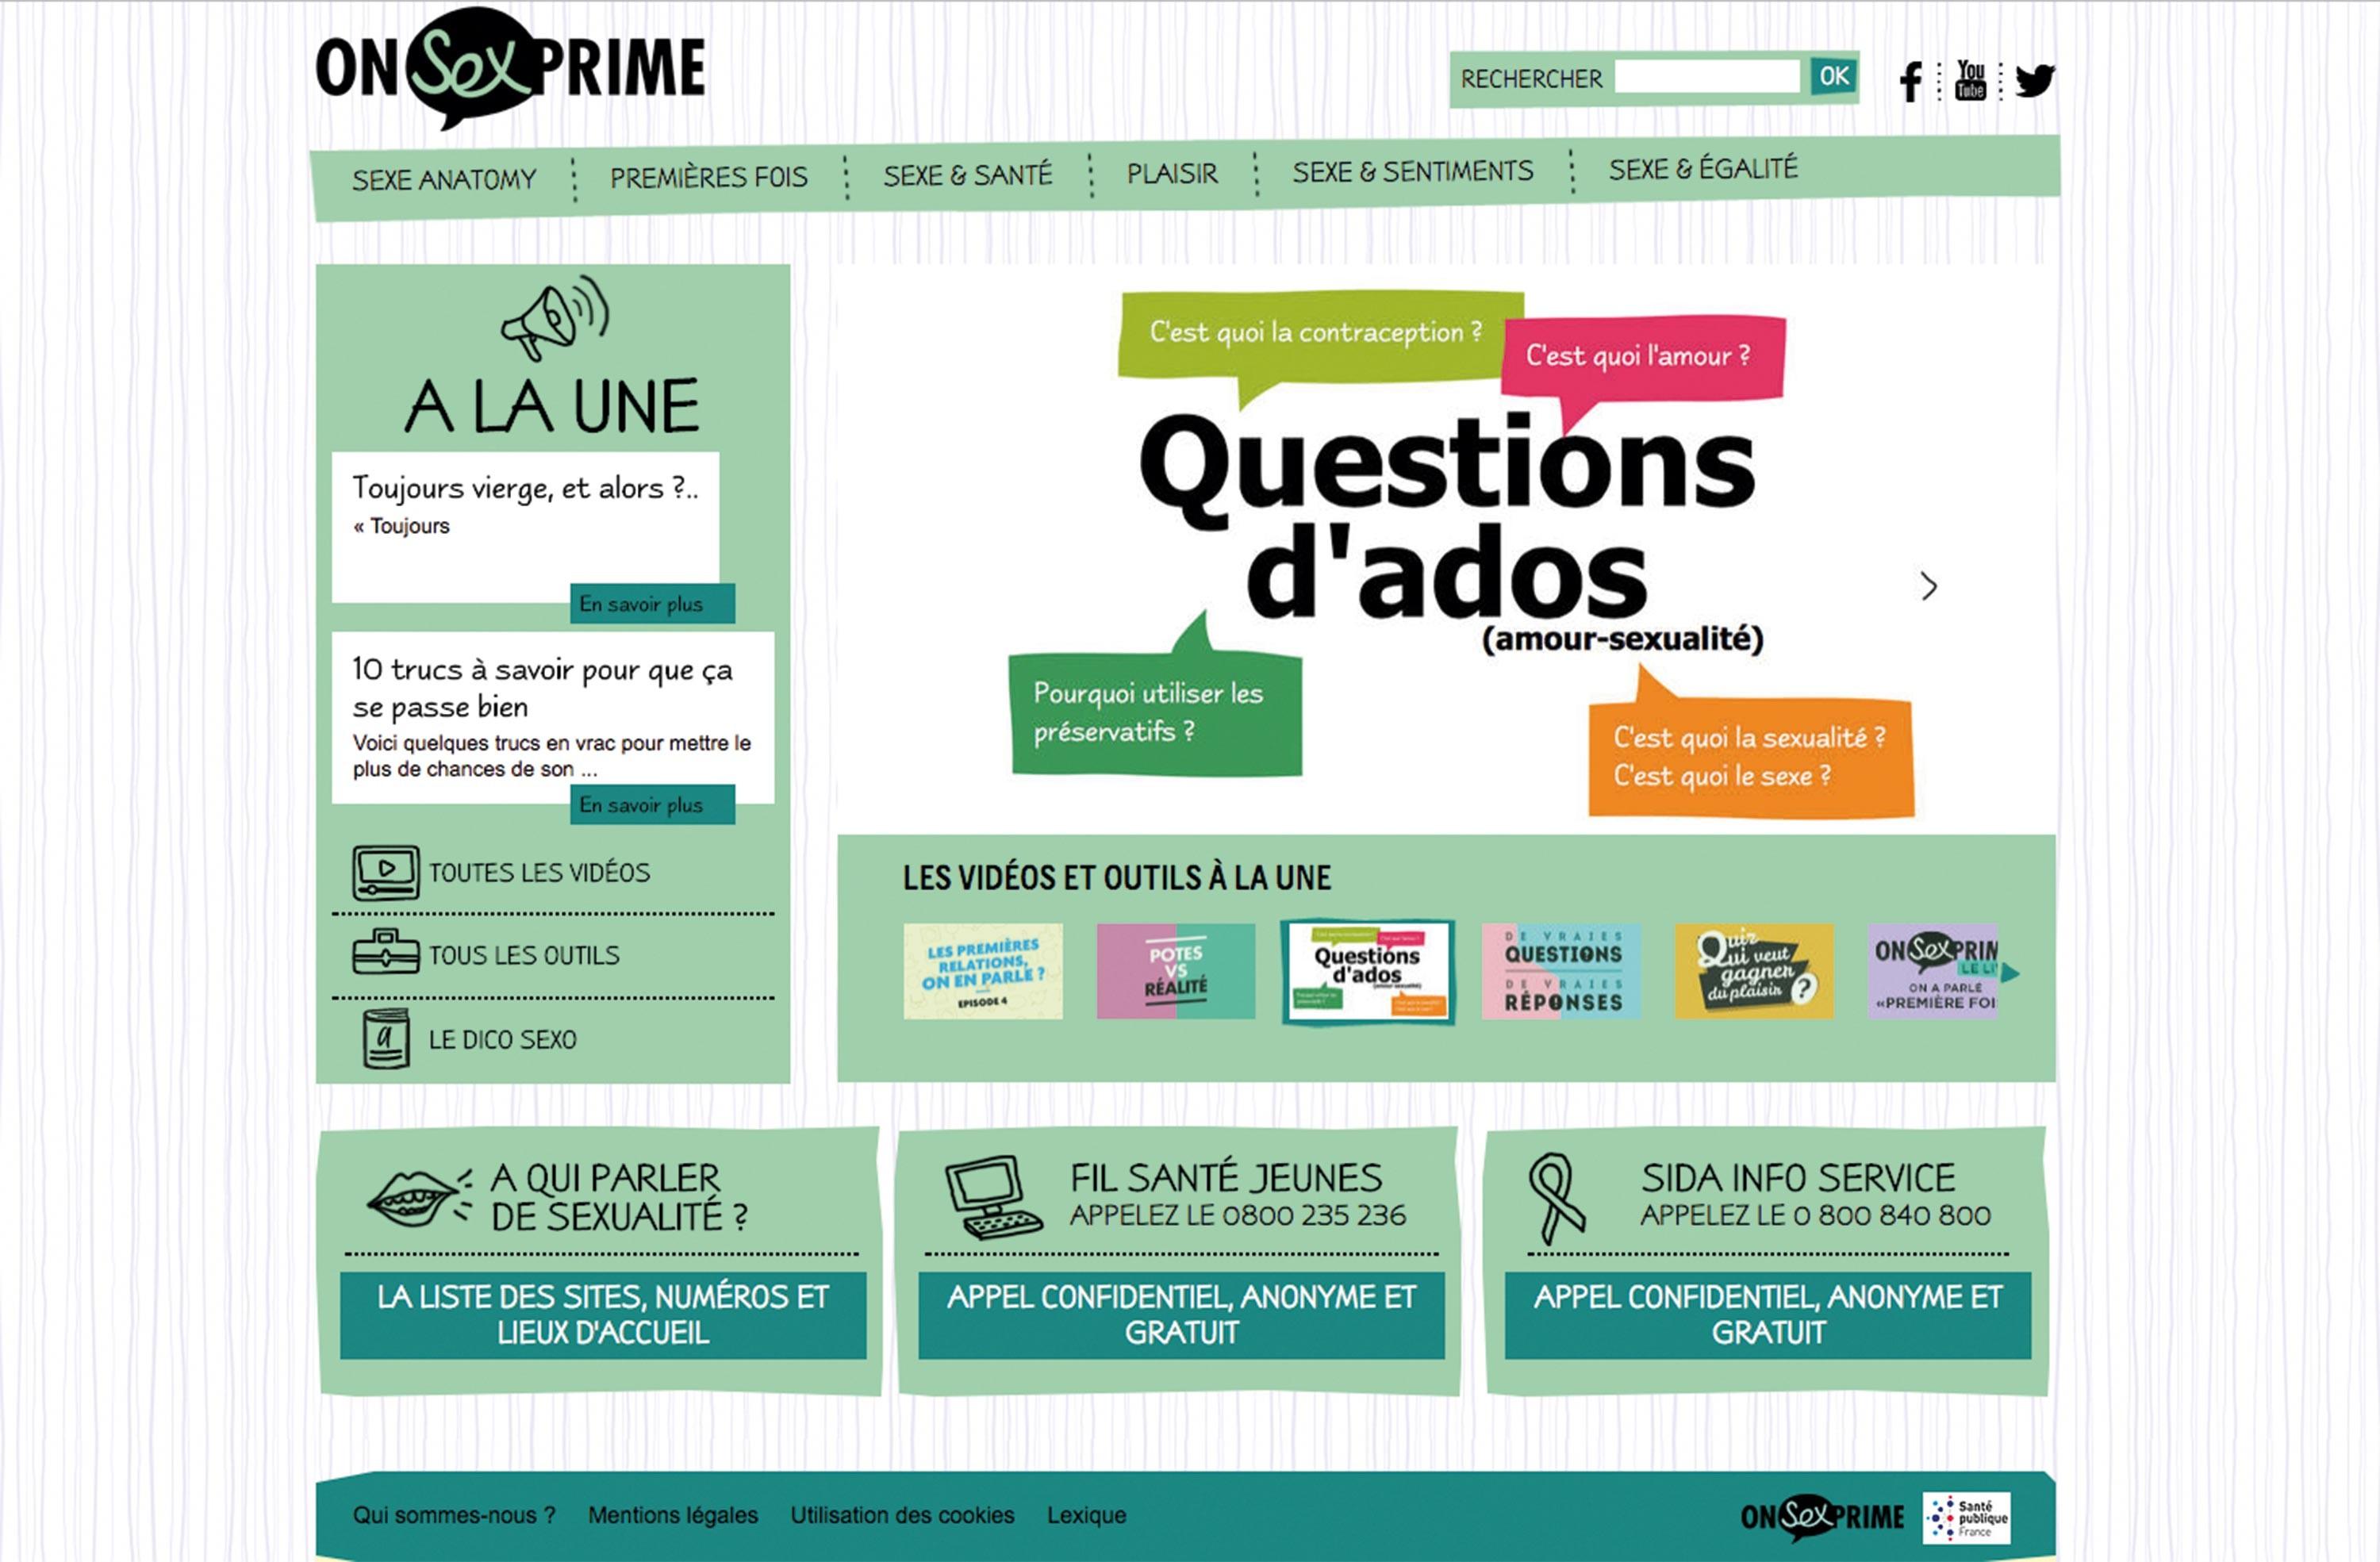 <stamp theme='svt-green1'>Doc. 1</stamp> Le site internet onsexprime.fr.